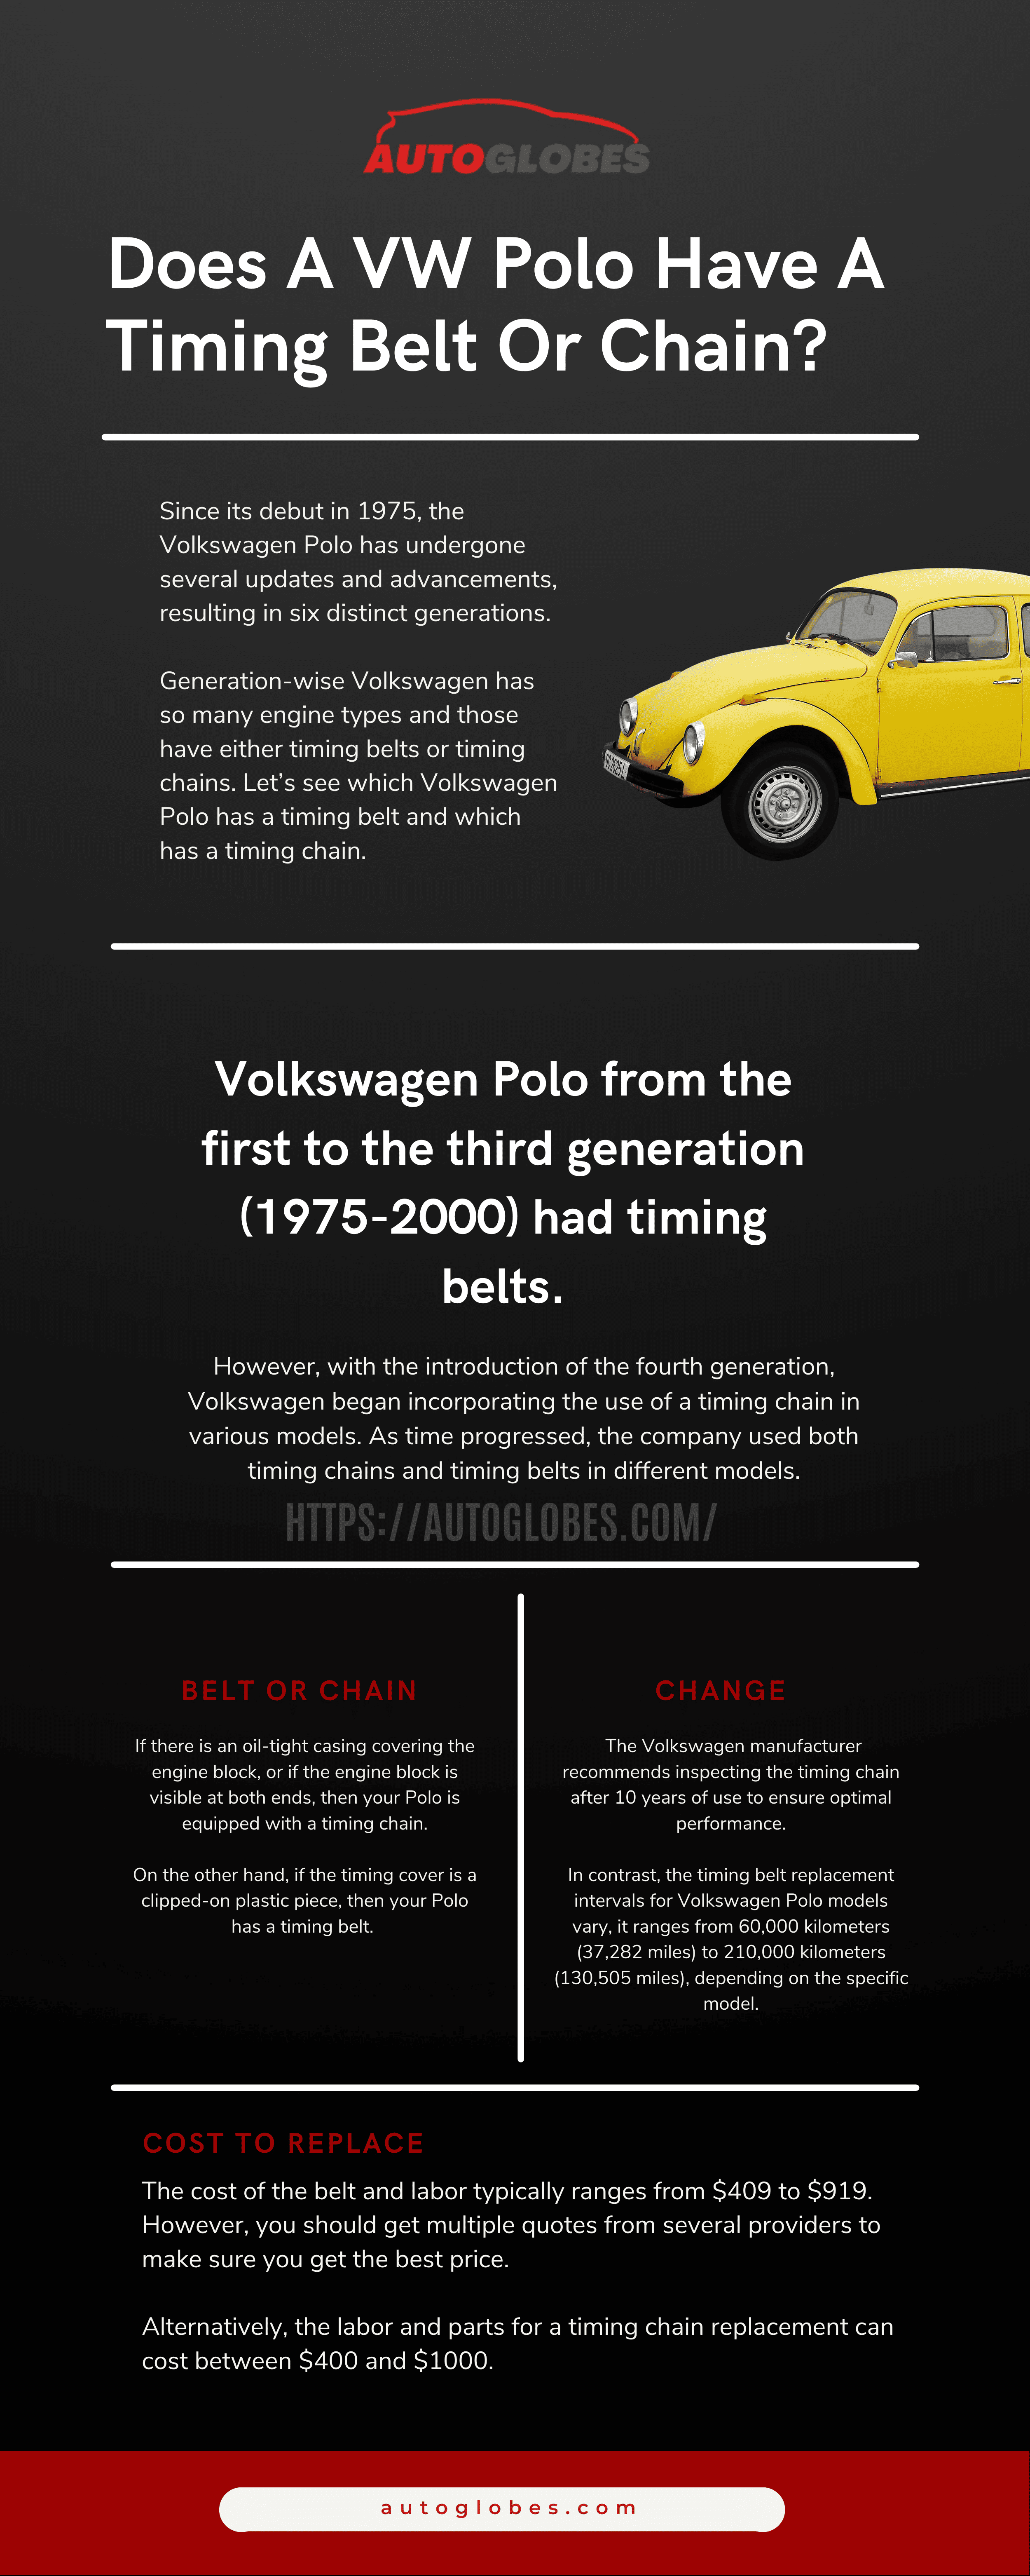 Does A VW Polo Have A Timing Belt Or Chain Infographic